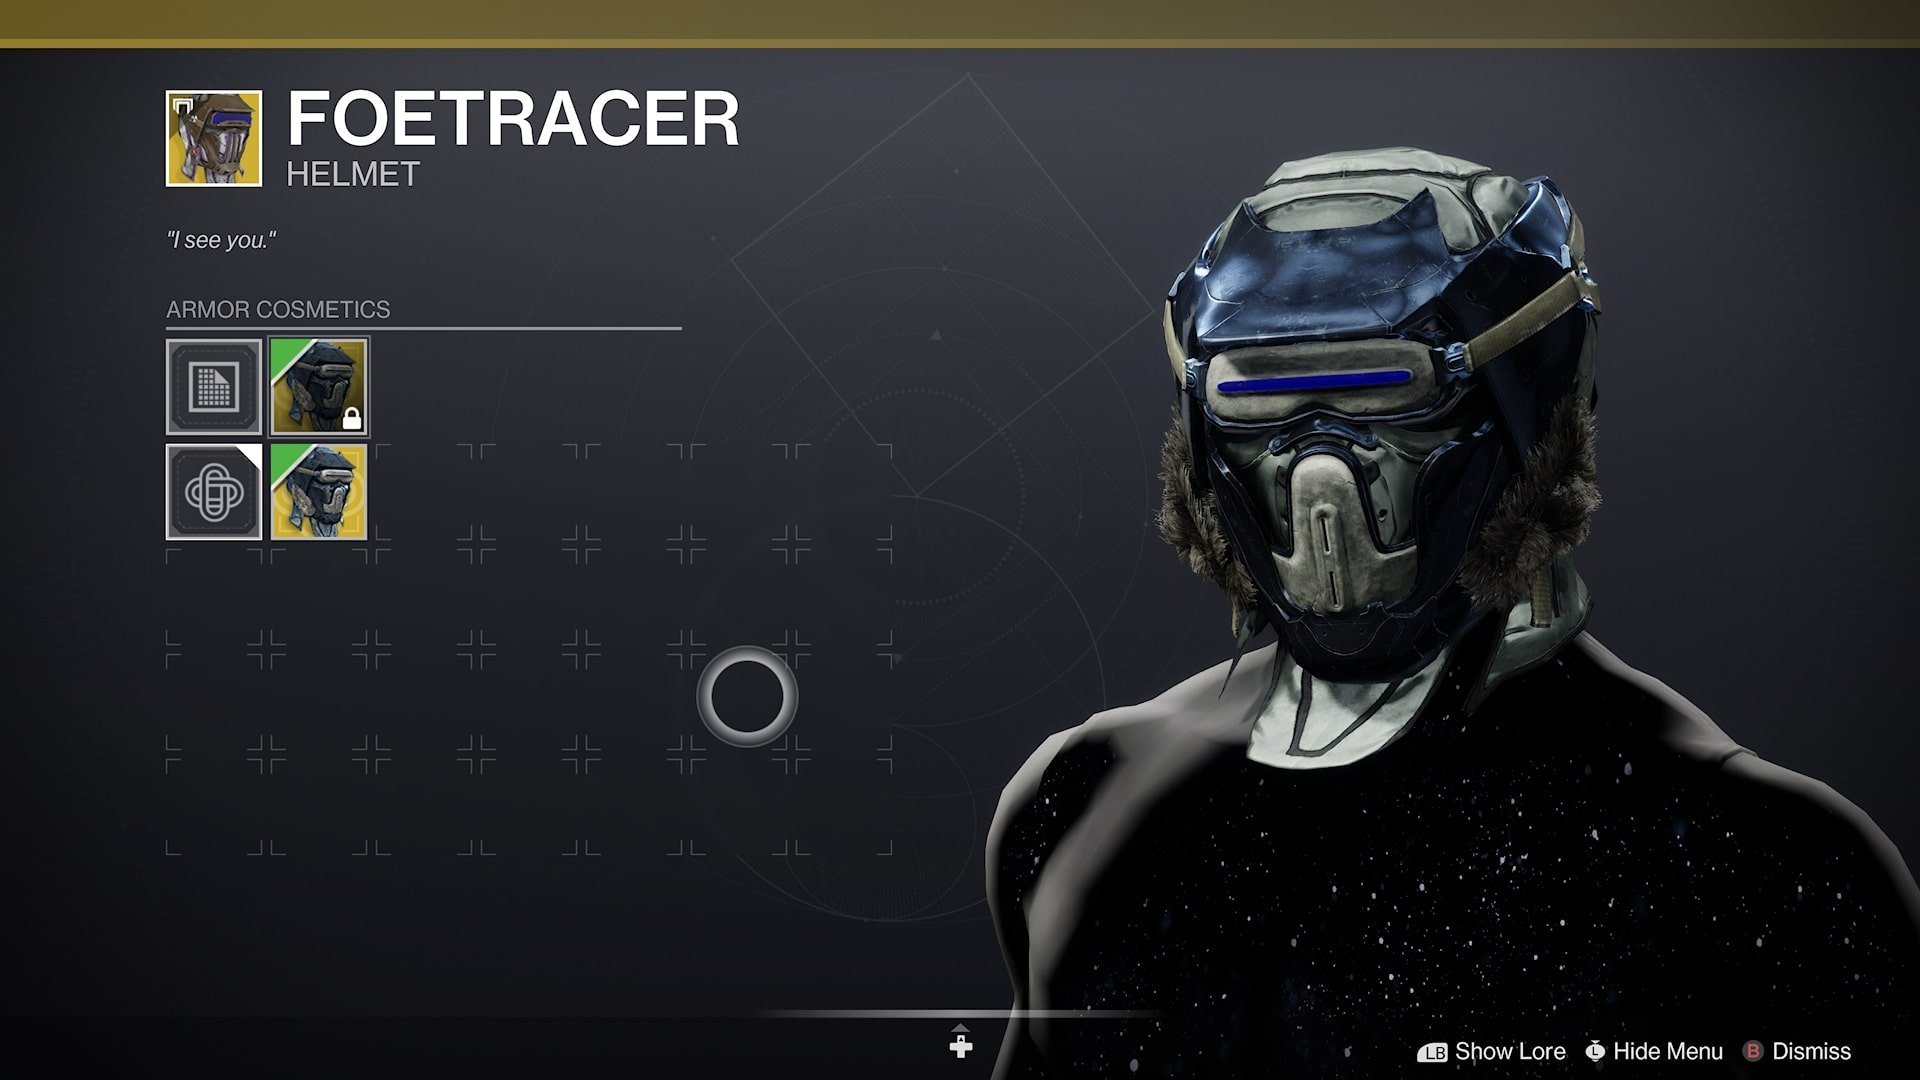 Foetracer